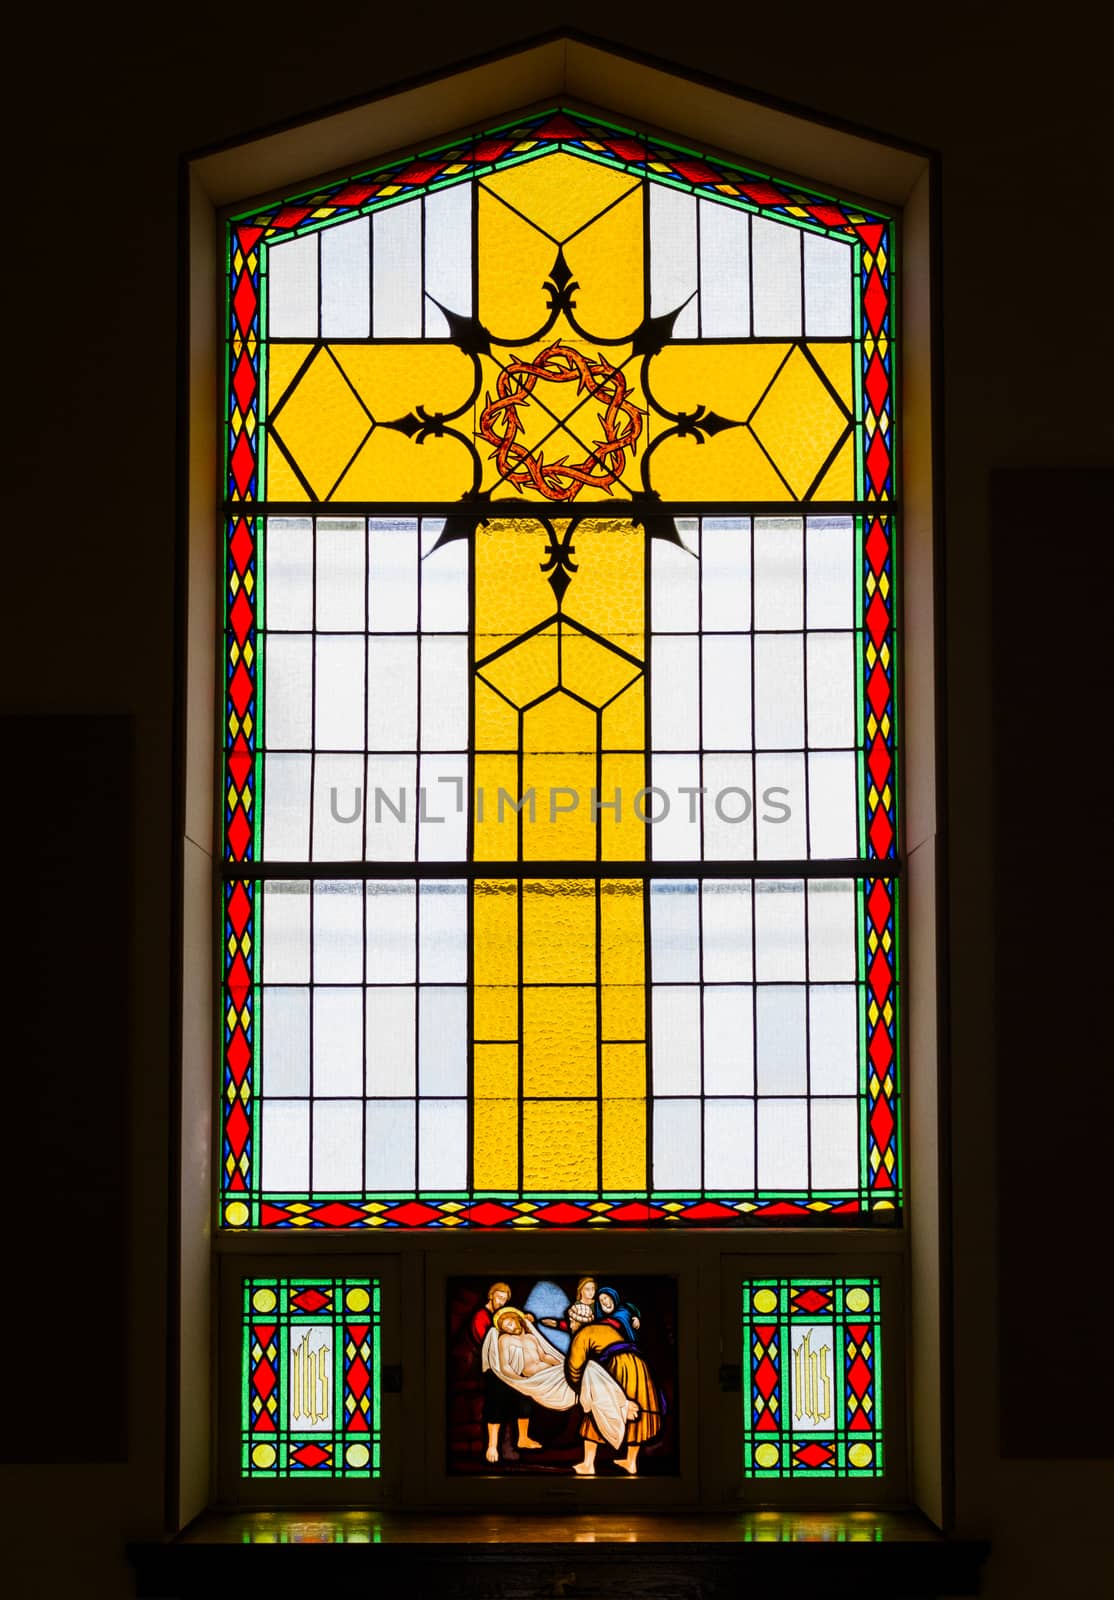 Bright Stained Glass Details inside a Chusrch